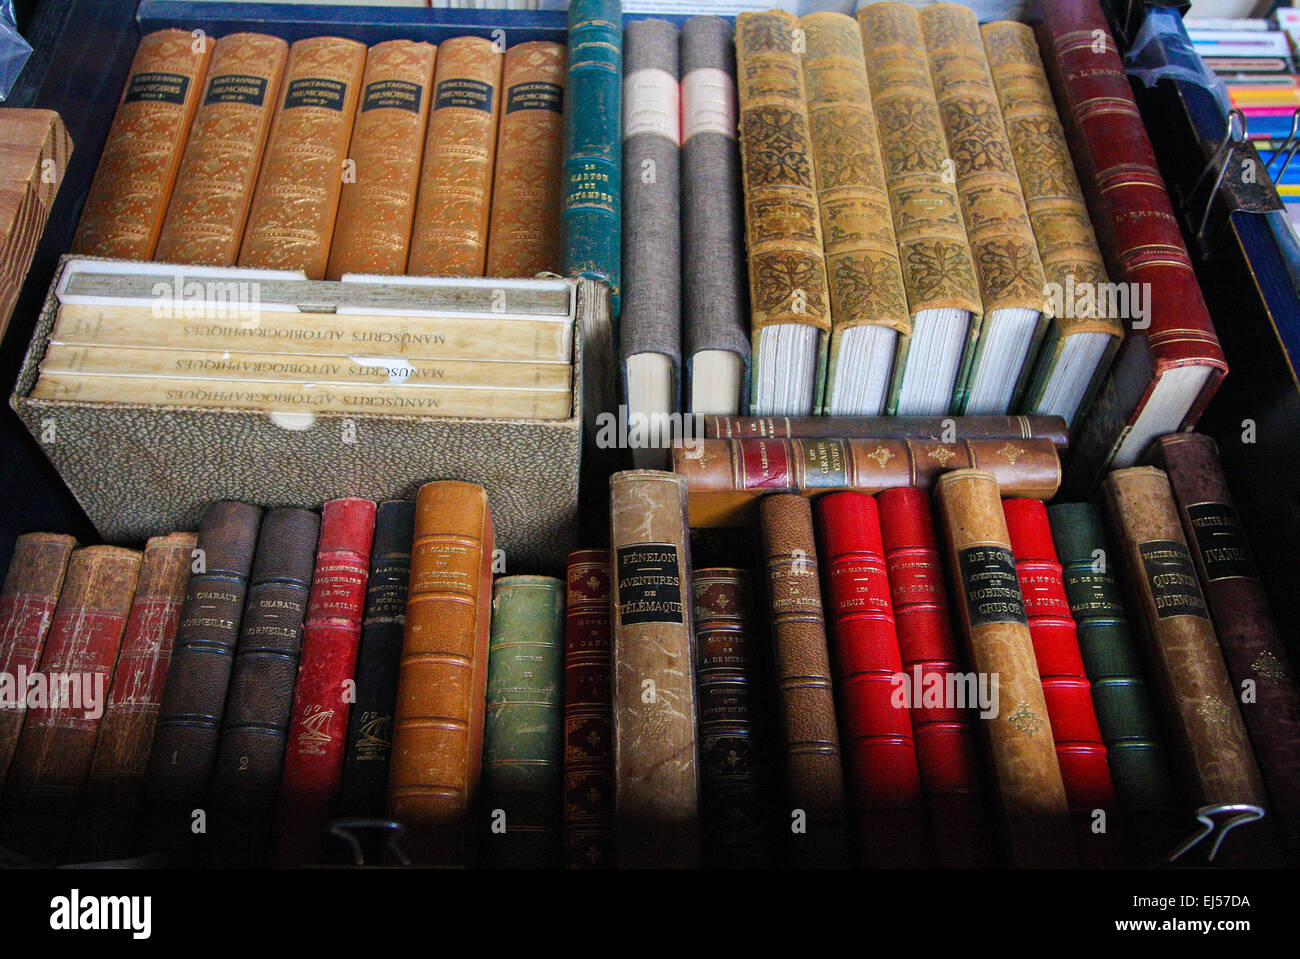 Old books on display at an antique book market in Lille, France. Stock Photo